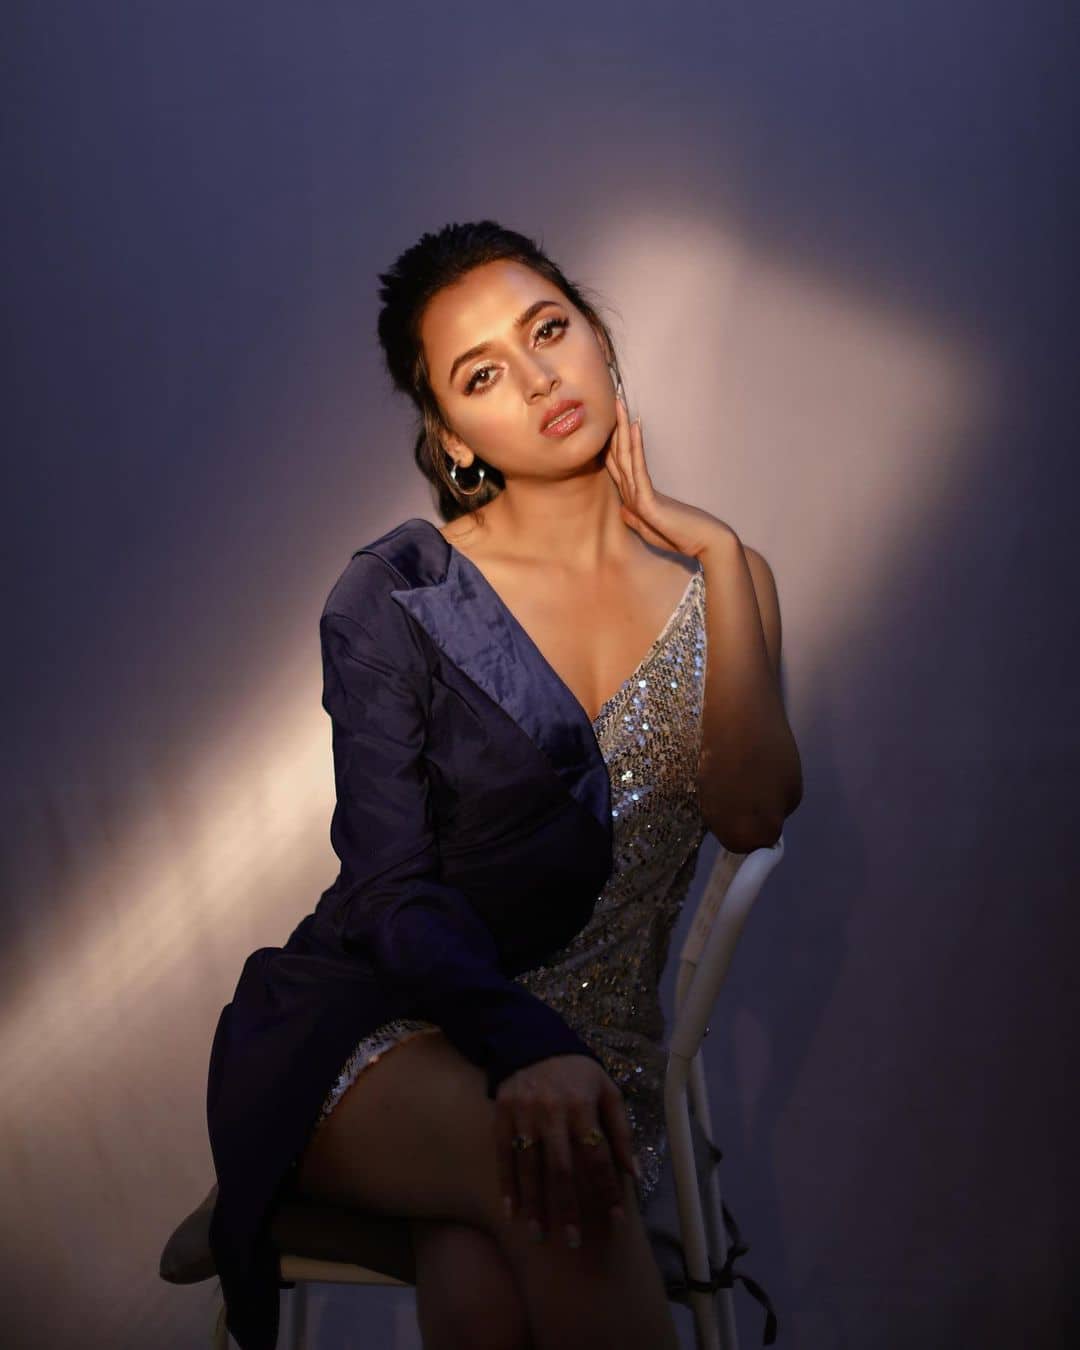 Tejasswi opts for natural make-up